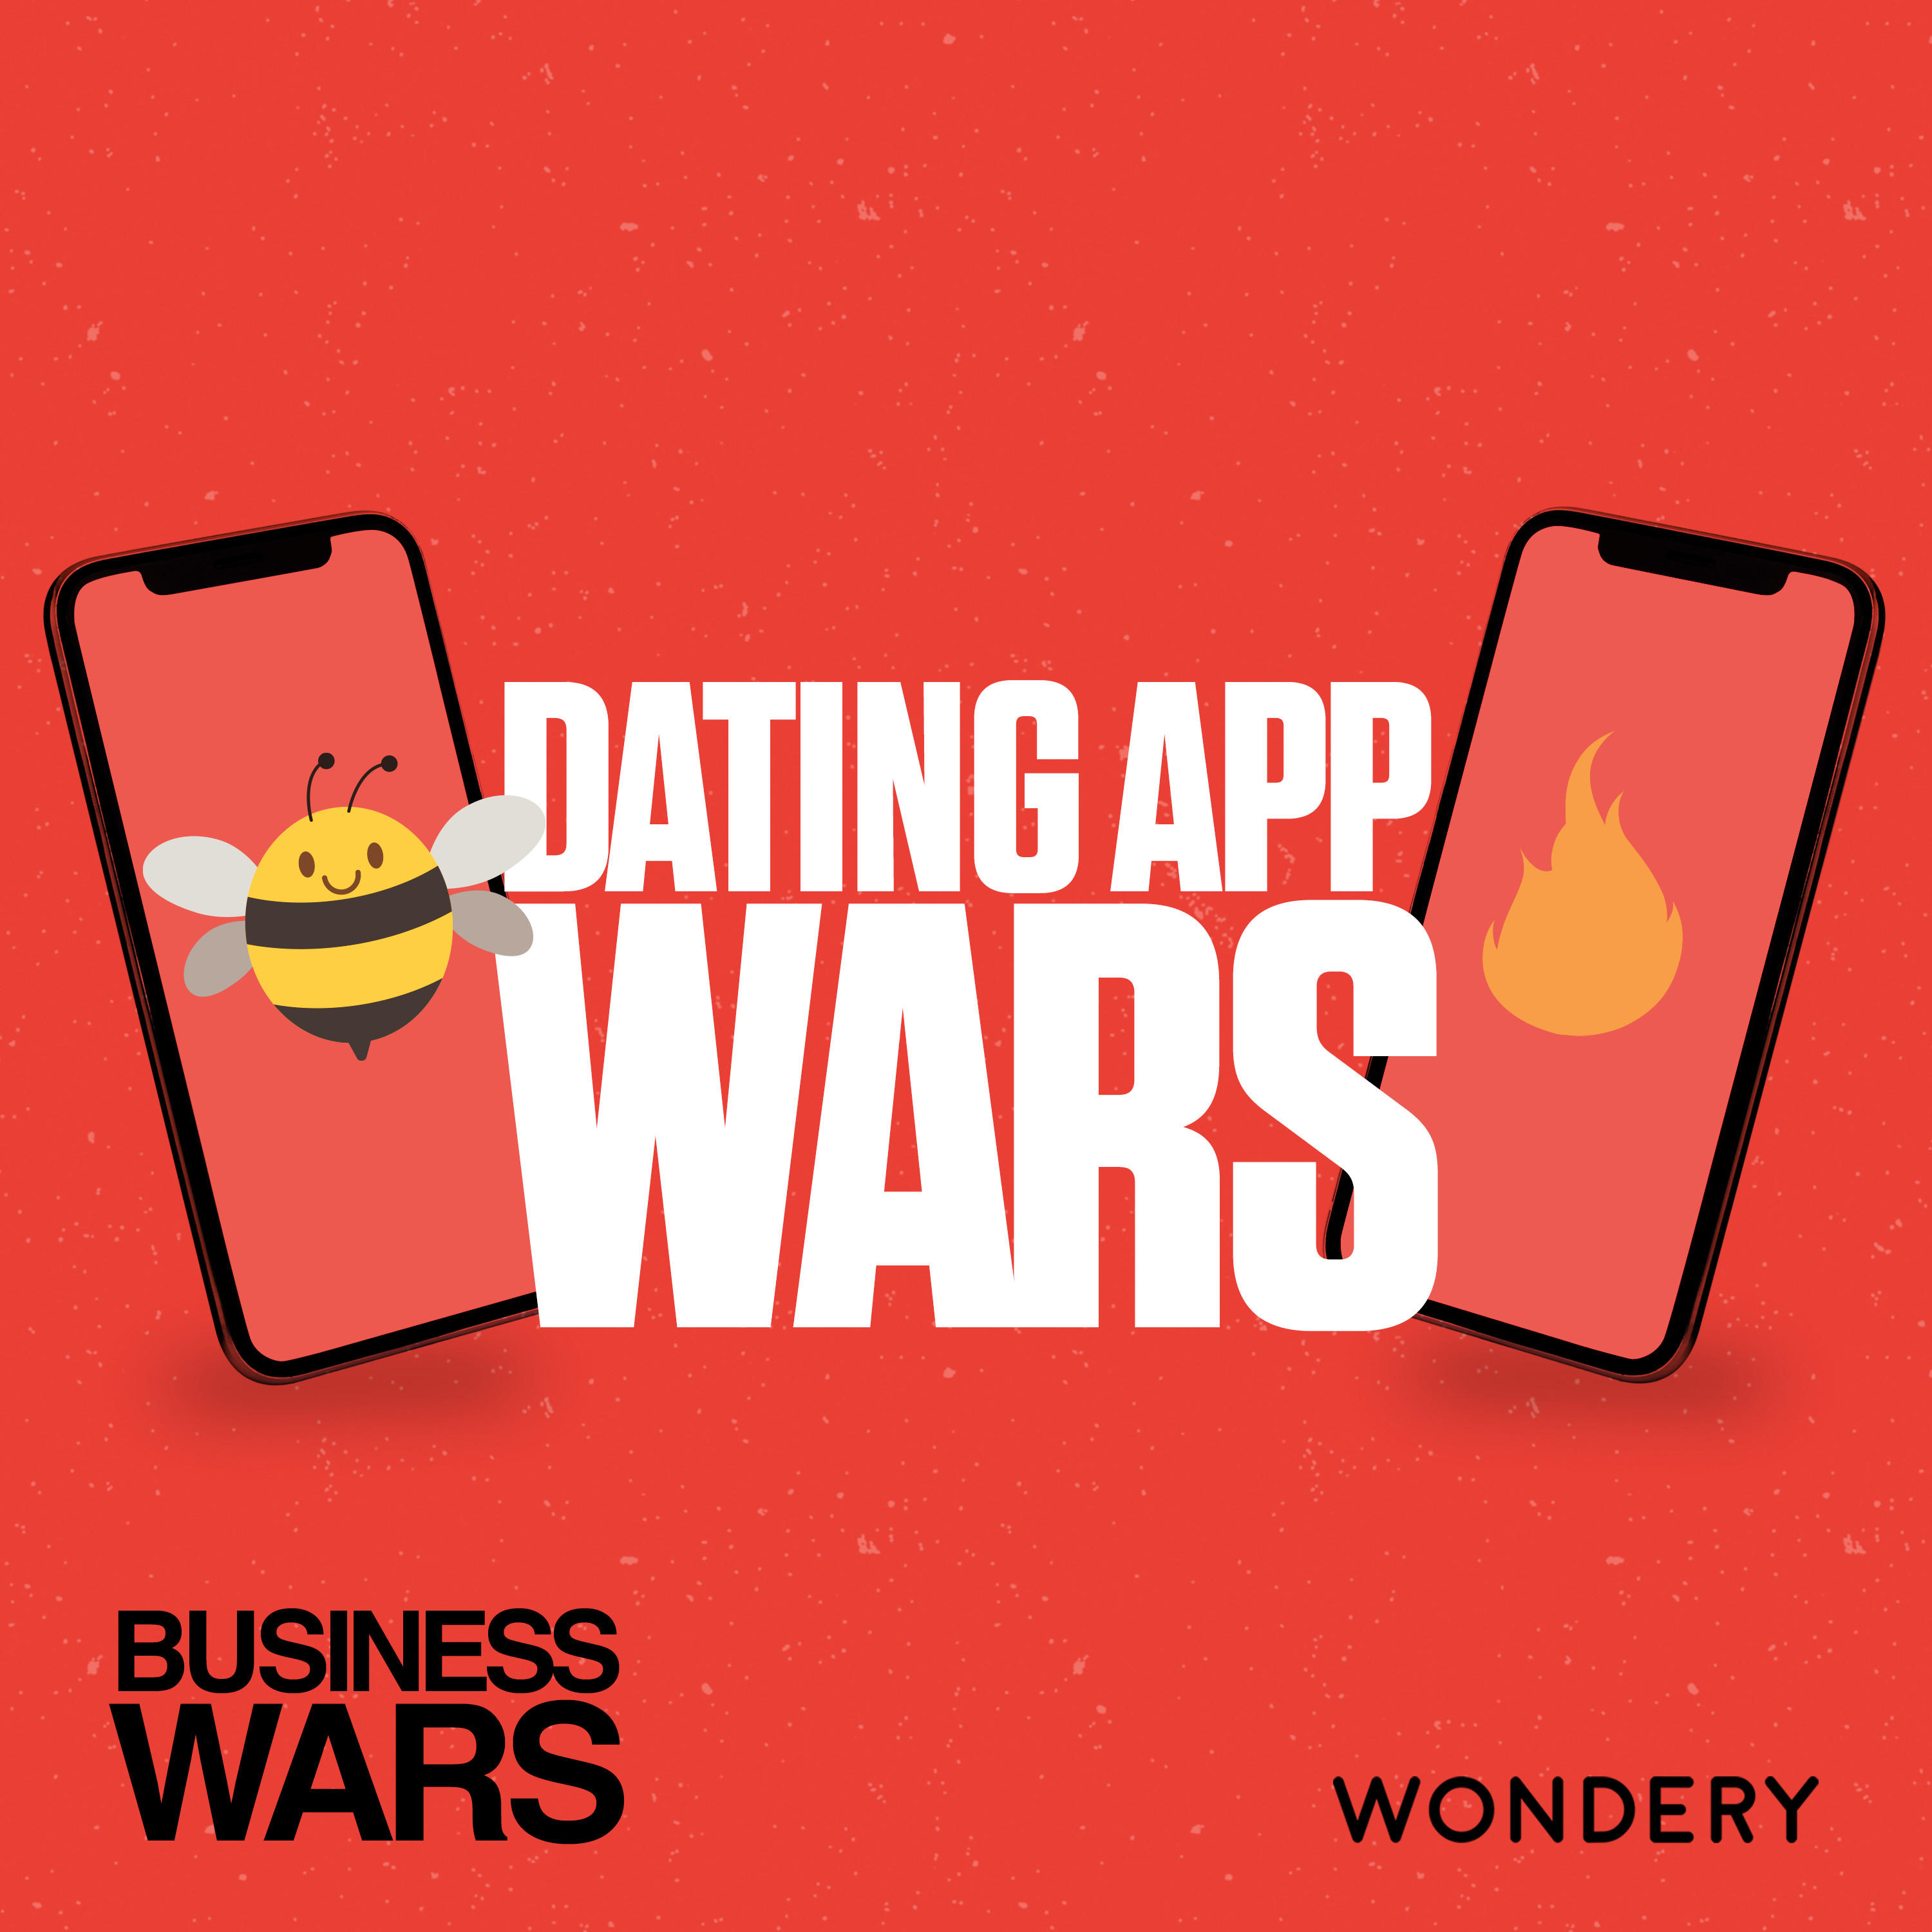 Dating App Wars | Dating Apps Pivot as COVID-19 Continues  | 7